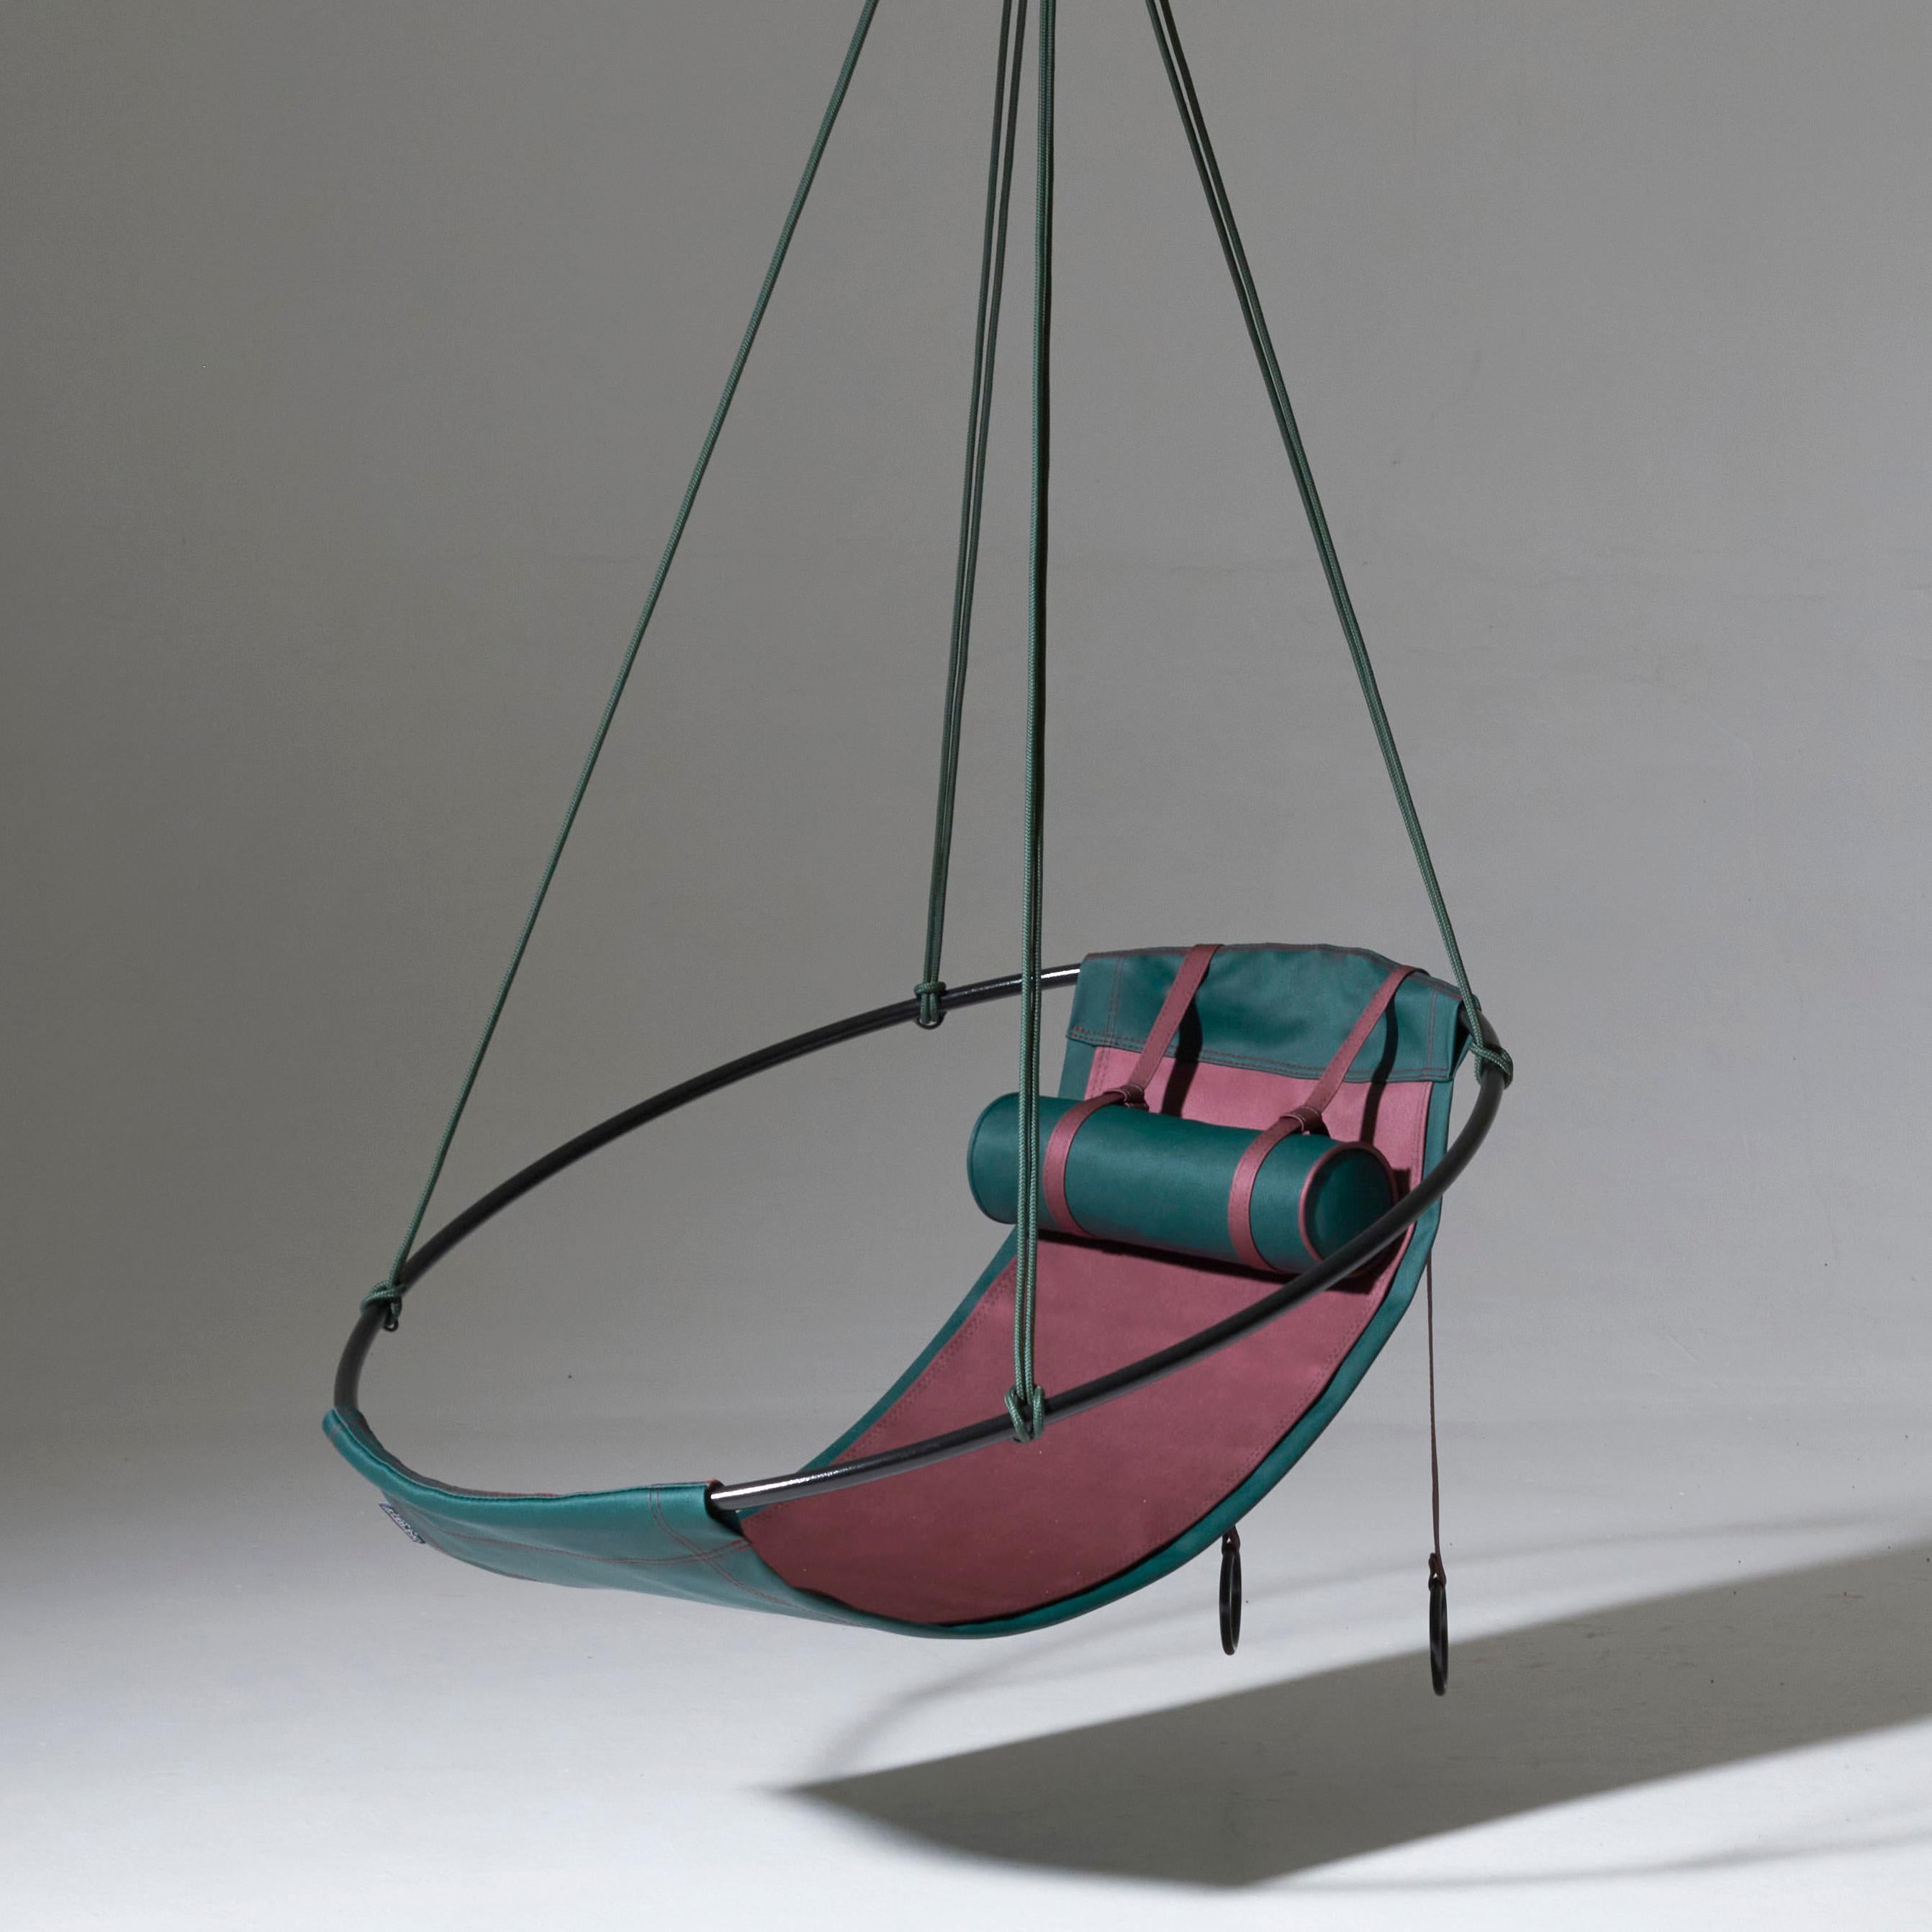 Our outdoor sling hanging chair is crafted with Spradling Silvertex material – a highly sustainable environmentally-friendly vegan material.
The Slings can be ordered as a single but also works together as a pair which is slightly different from